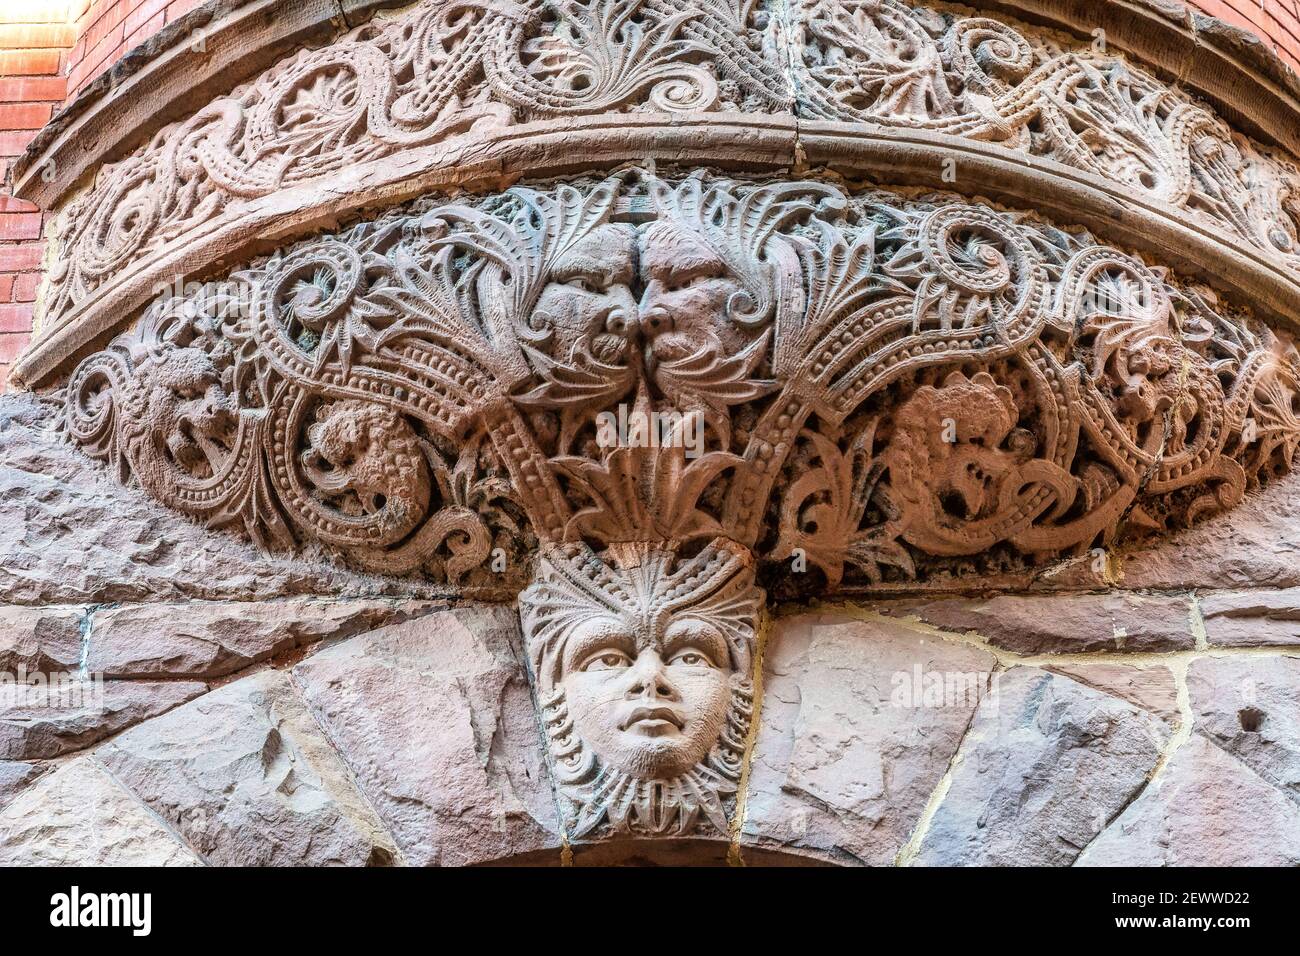 A balcony decorations on a pink sandstone building belonging to the University of Toronto, Canada Stock Photo